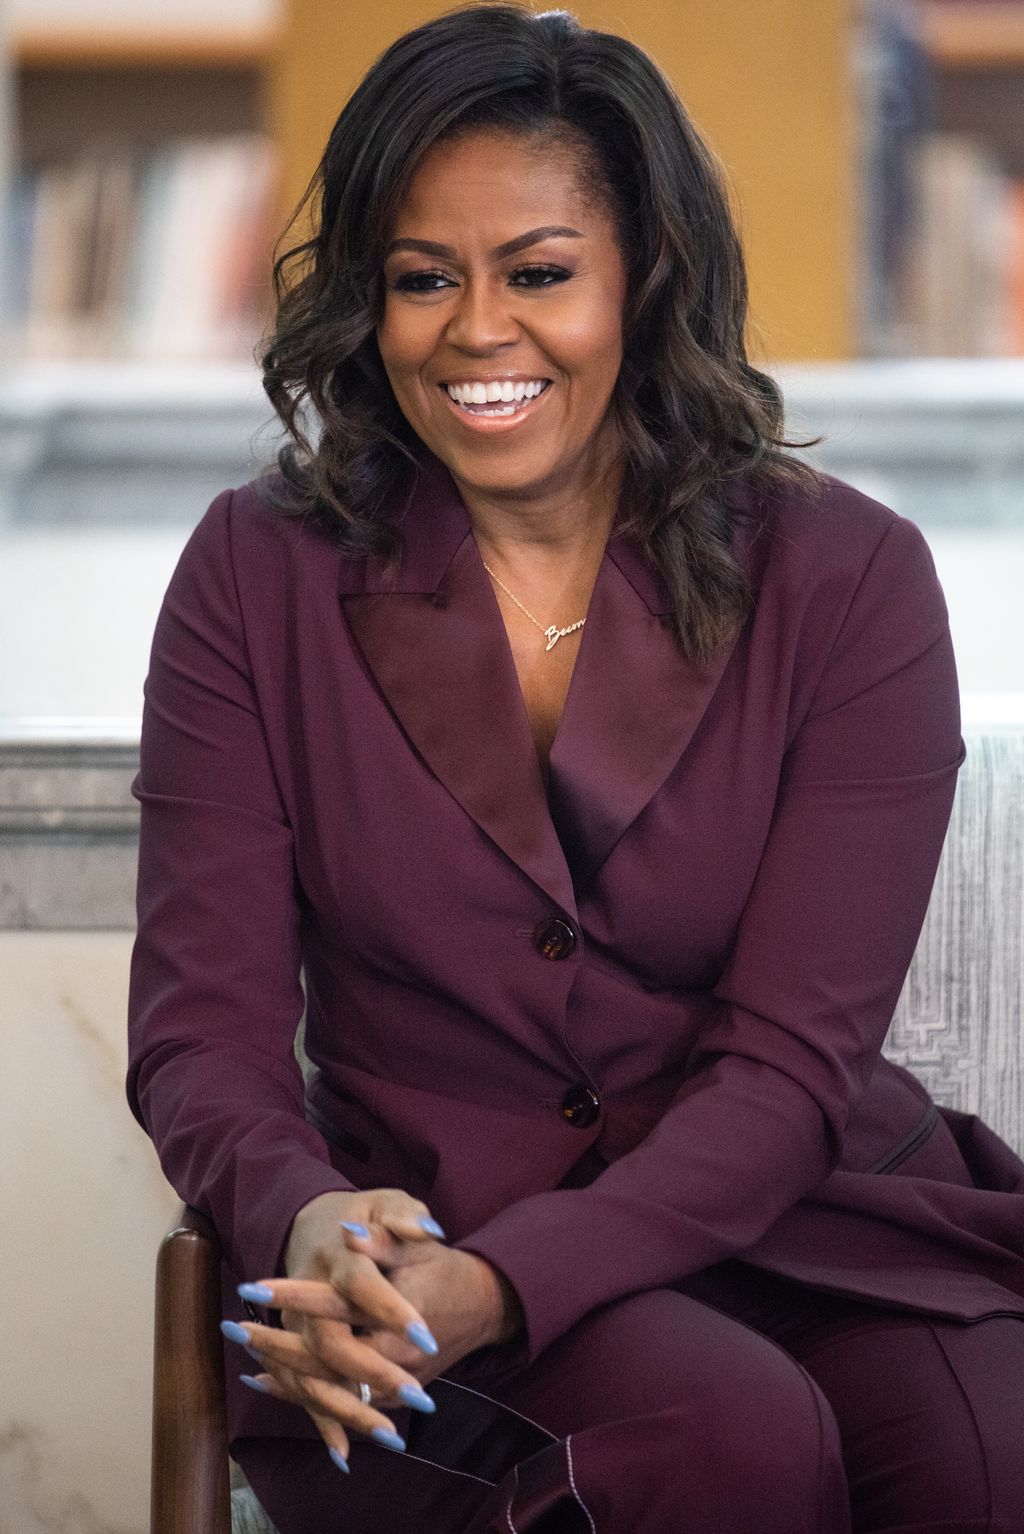 Michelle Obama in a maroon suit smiling with her hair in curls